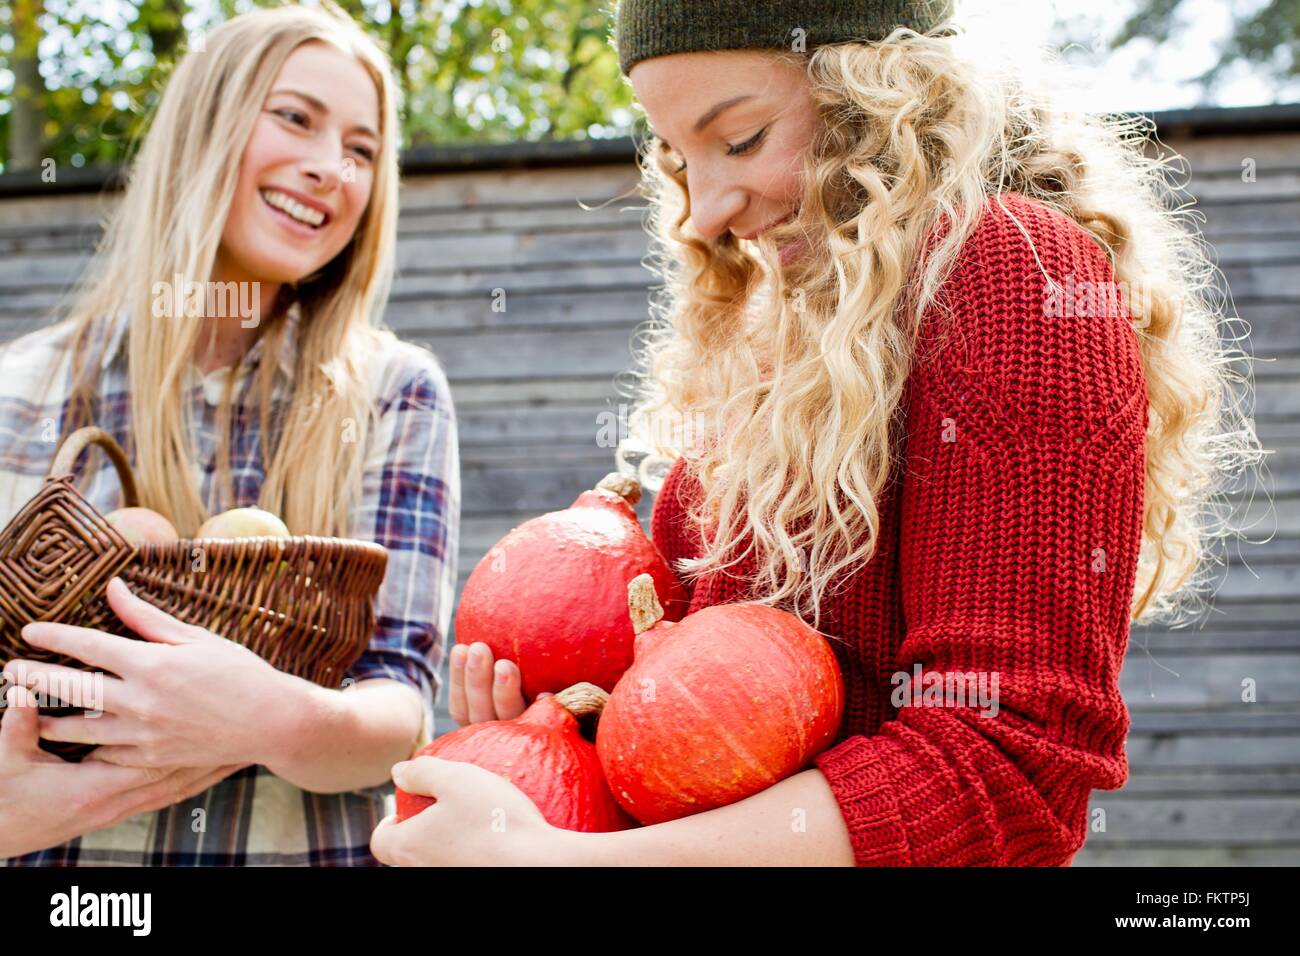 Two women holding homegrown produce Stock Photo